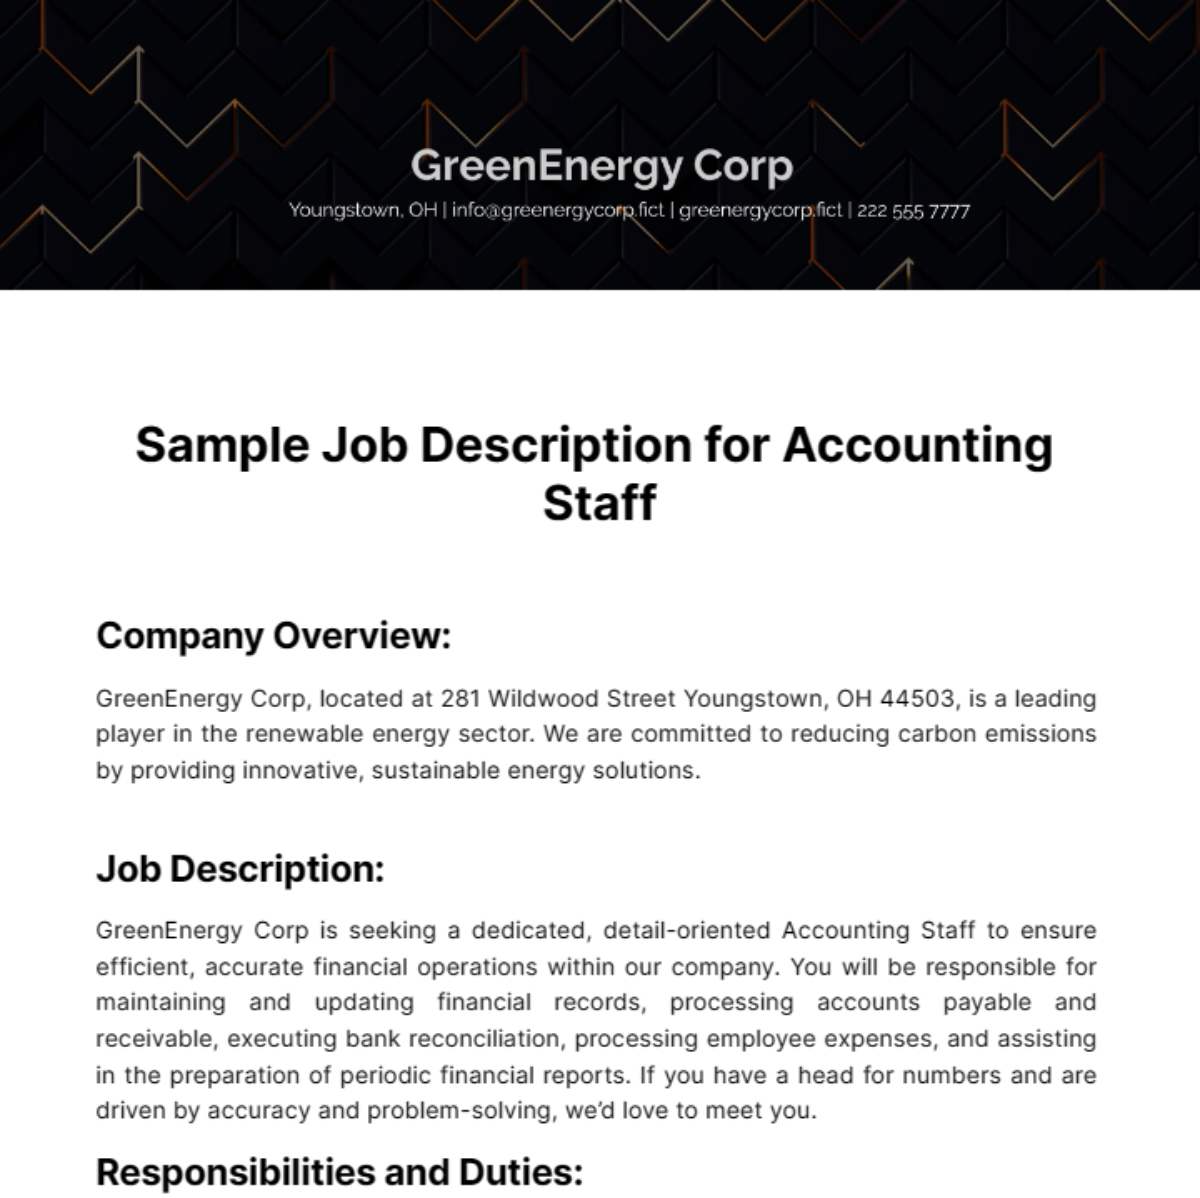 Sample Job Description for Accounting Staff Template